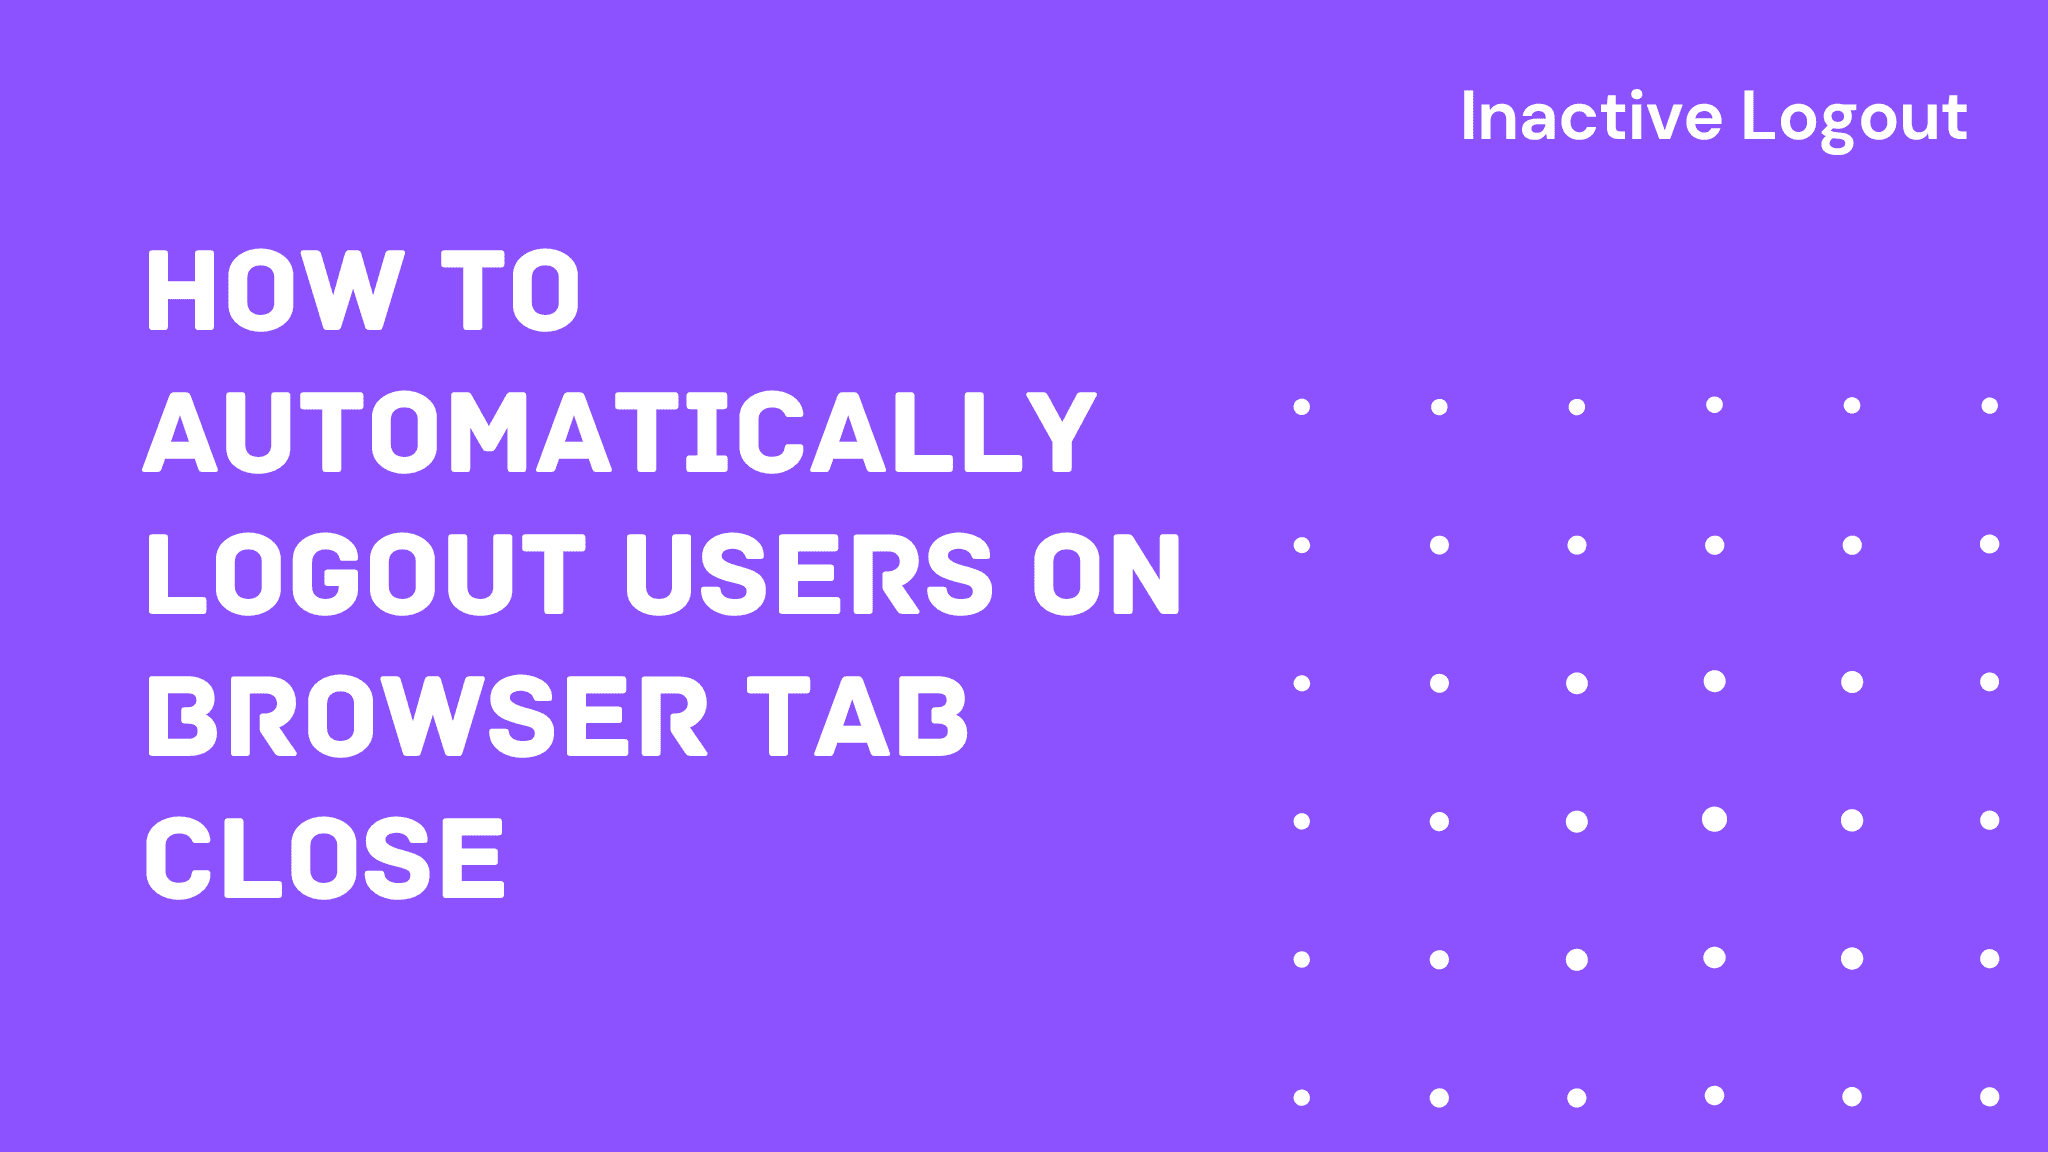 How to Automatically logout users on Browser Tab close